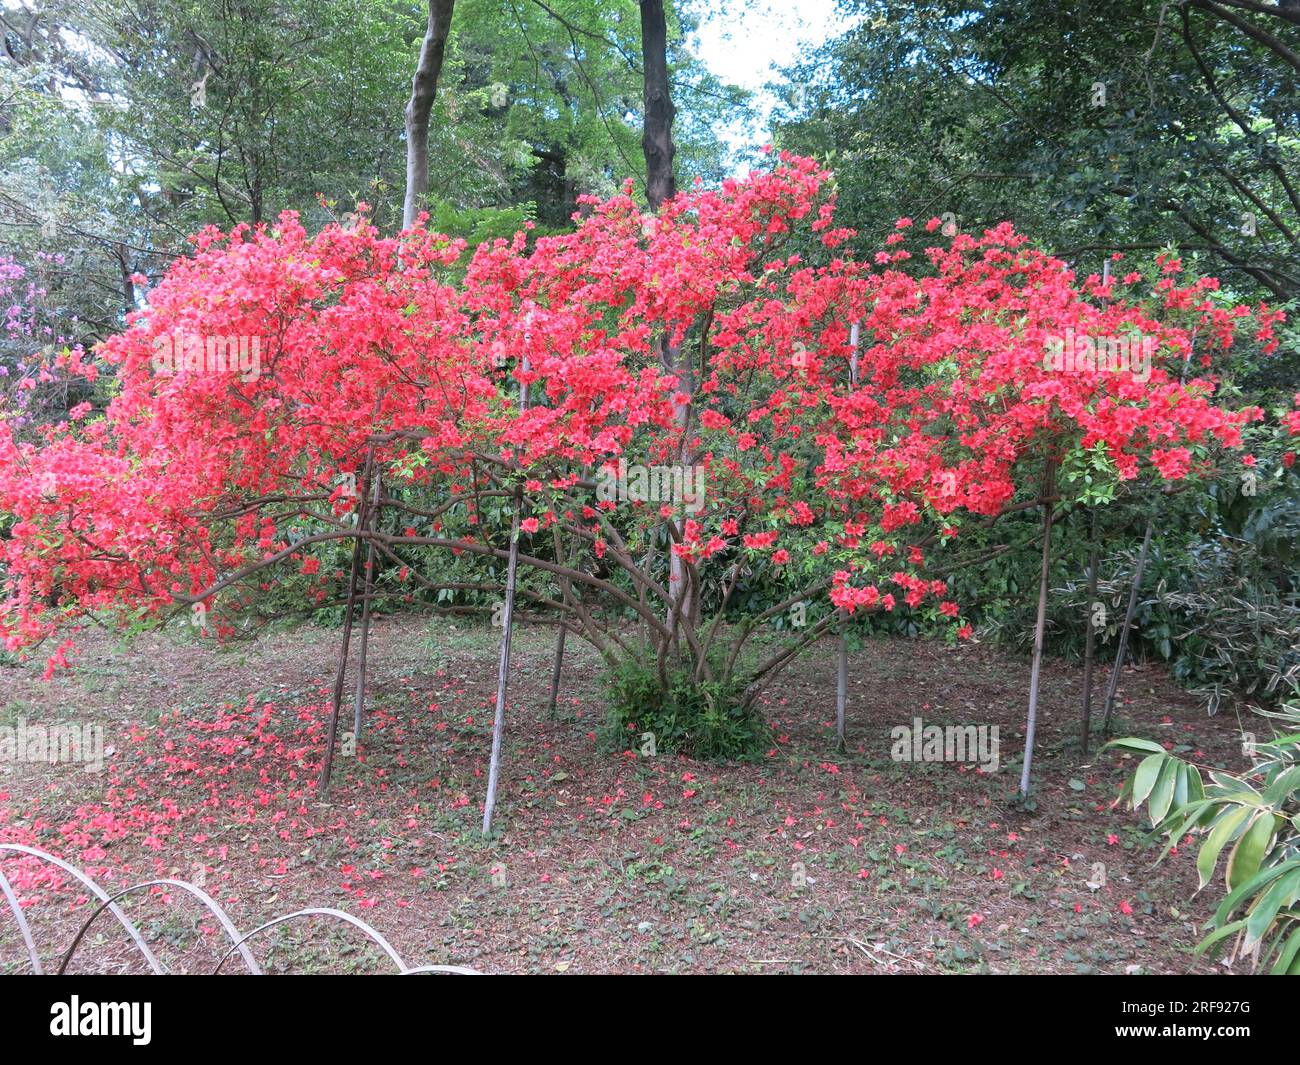 Botanical images of Japan: a mature azalea shrub with arching branches is propped up with stakes and in full bloom with its deep pink blossom. Stock Photo